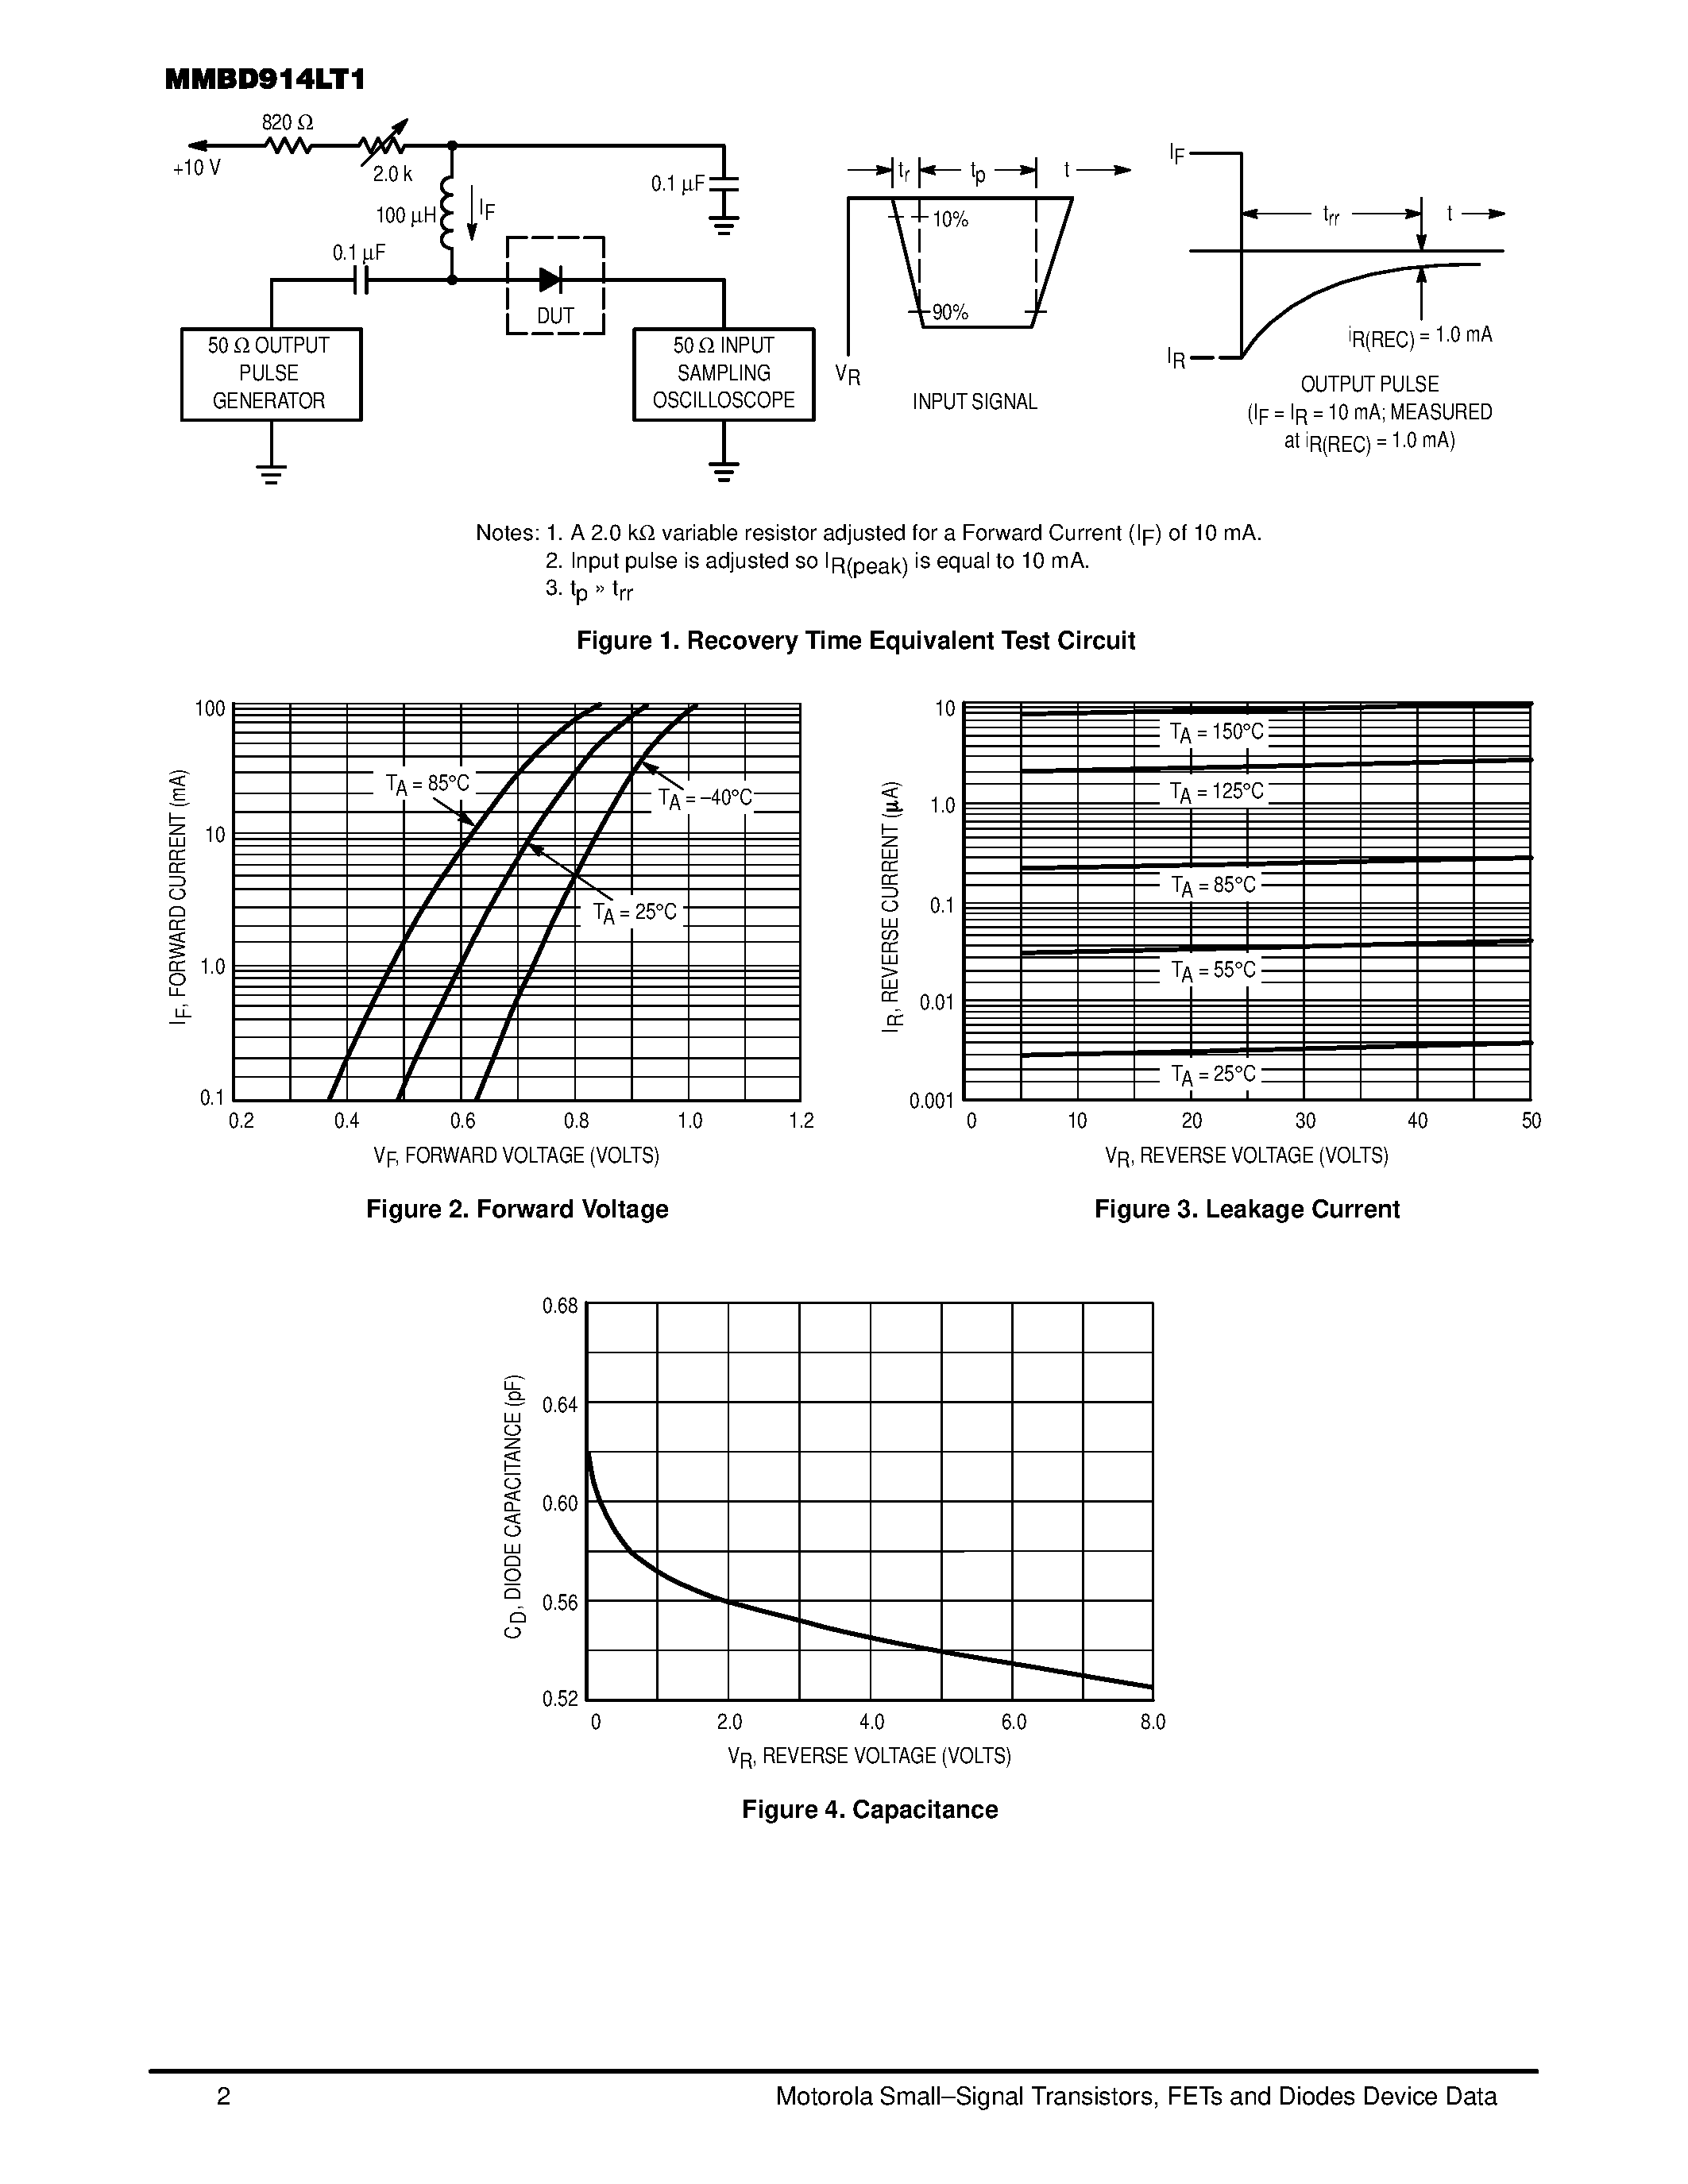 Datasheet MMBD914LT1 - High-Speed Switching Diode page 2